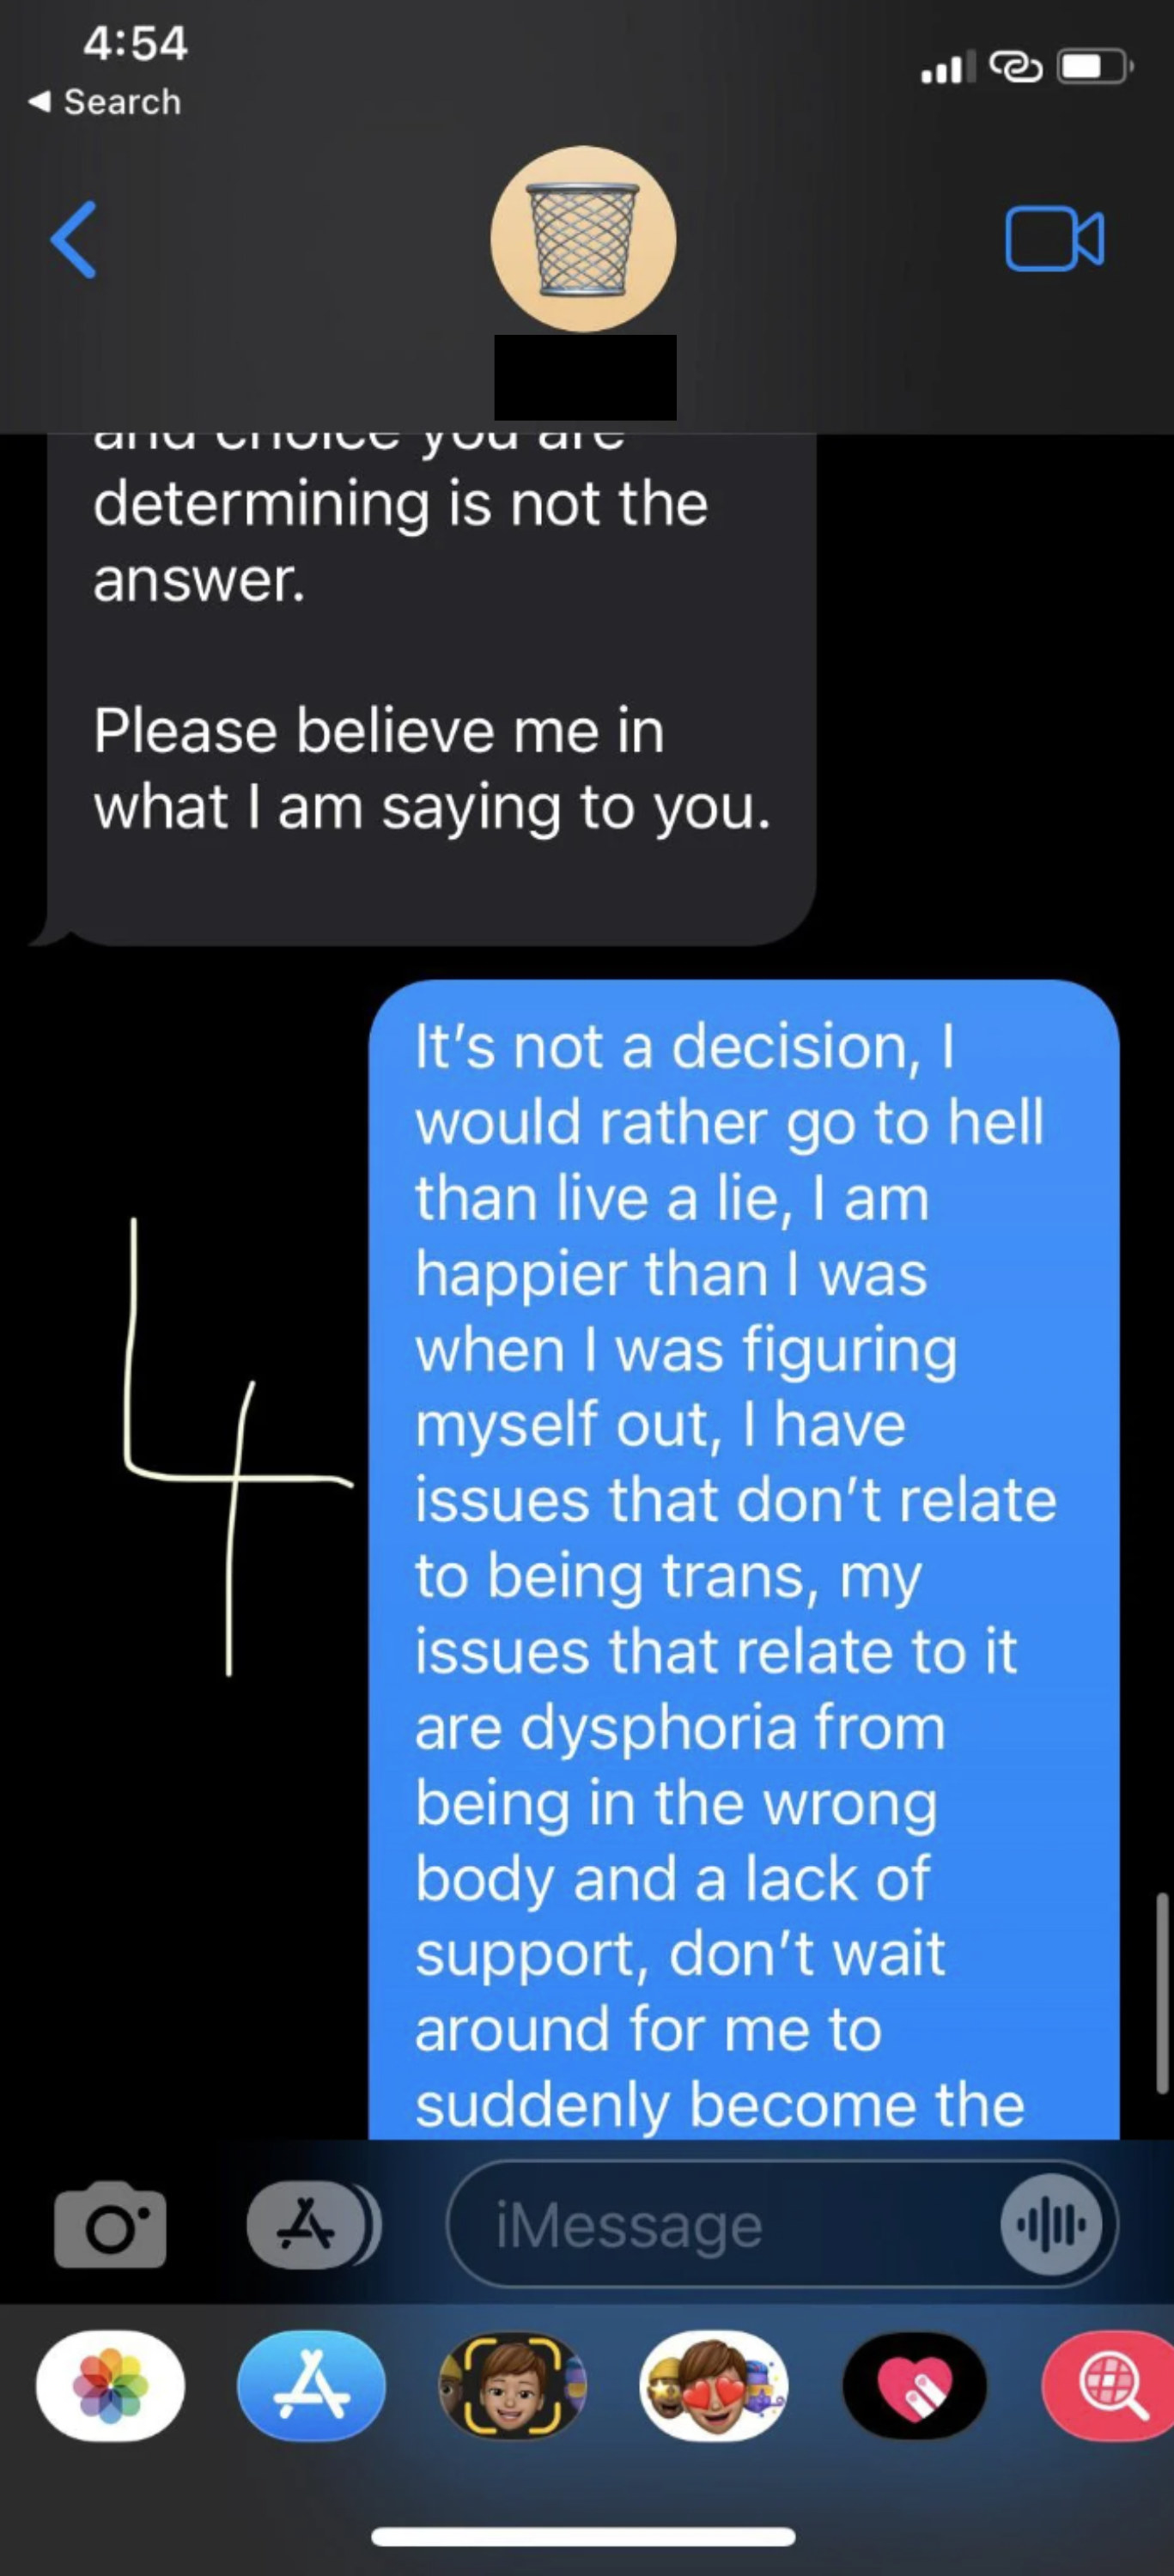 Child responds by saying &quot;It&#x27;s not a decision, I would rather go to hell than live a lie&quot; and their issues aren&#x27;t about being trans but having dysphoria related to living in the wrong body and a lack of support